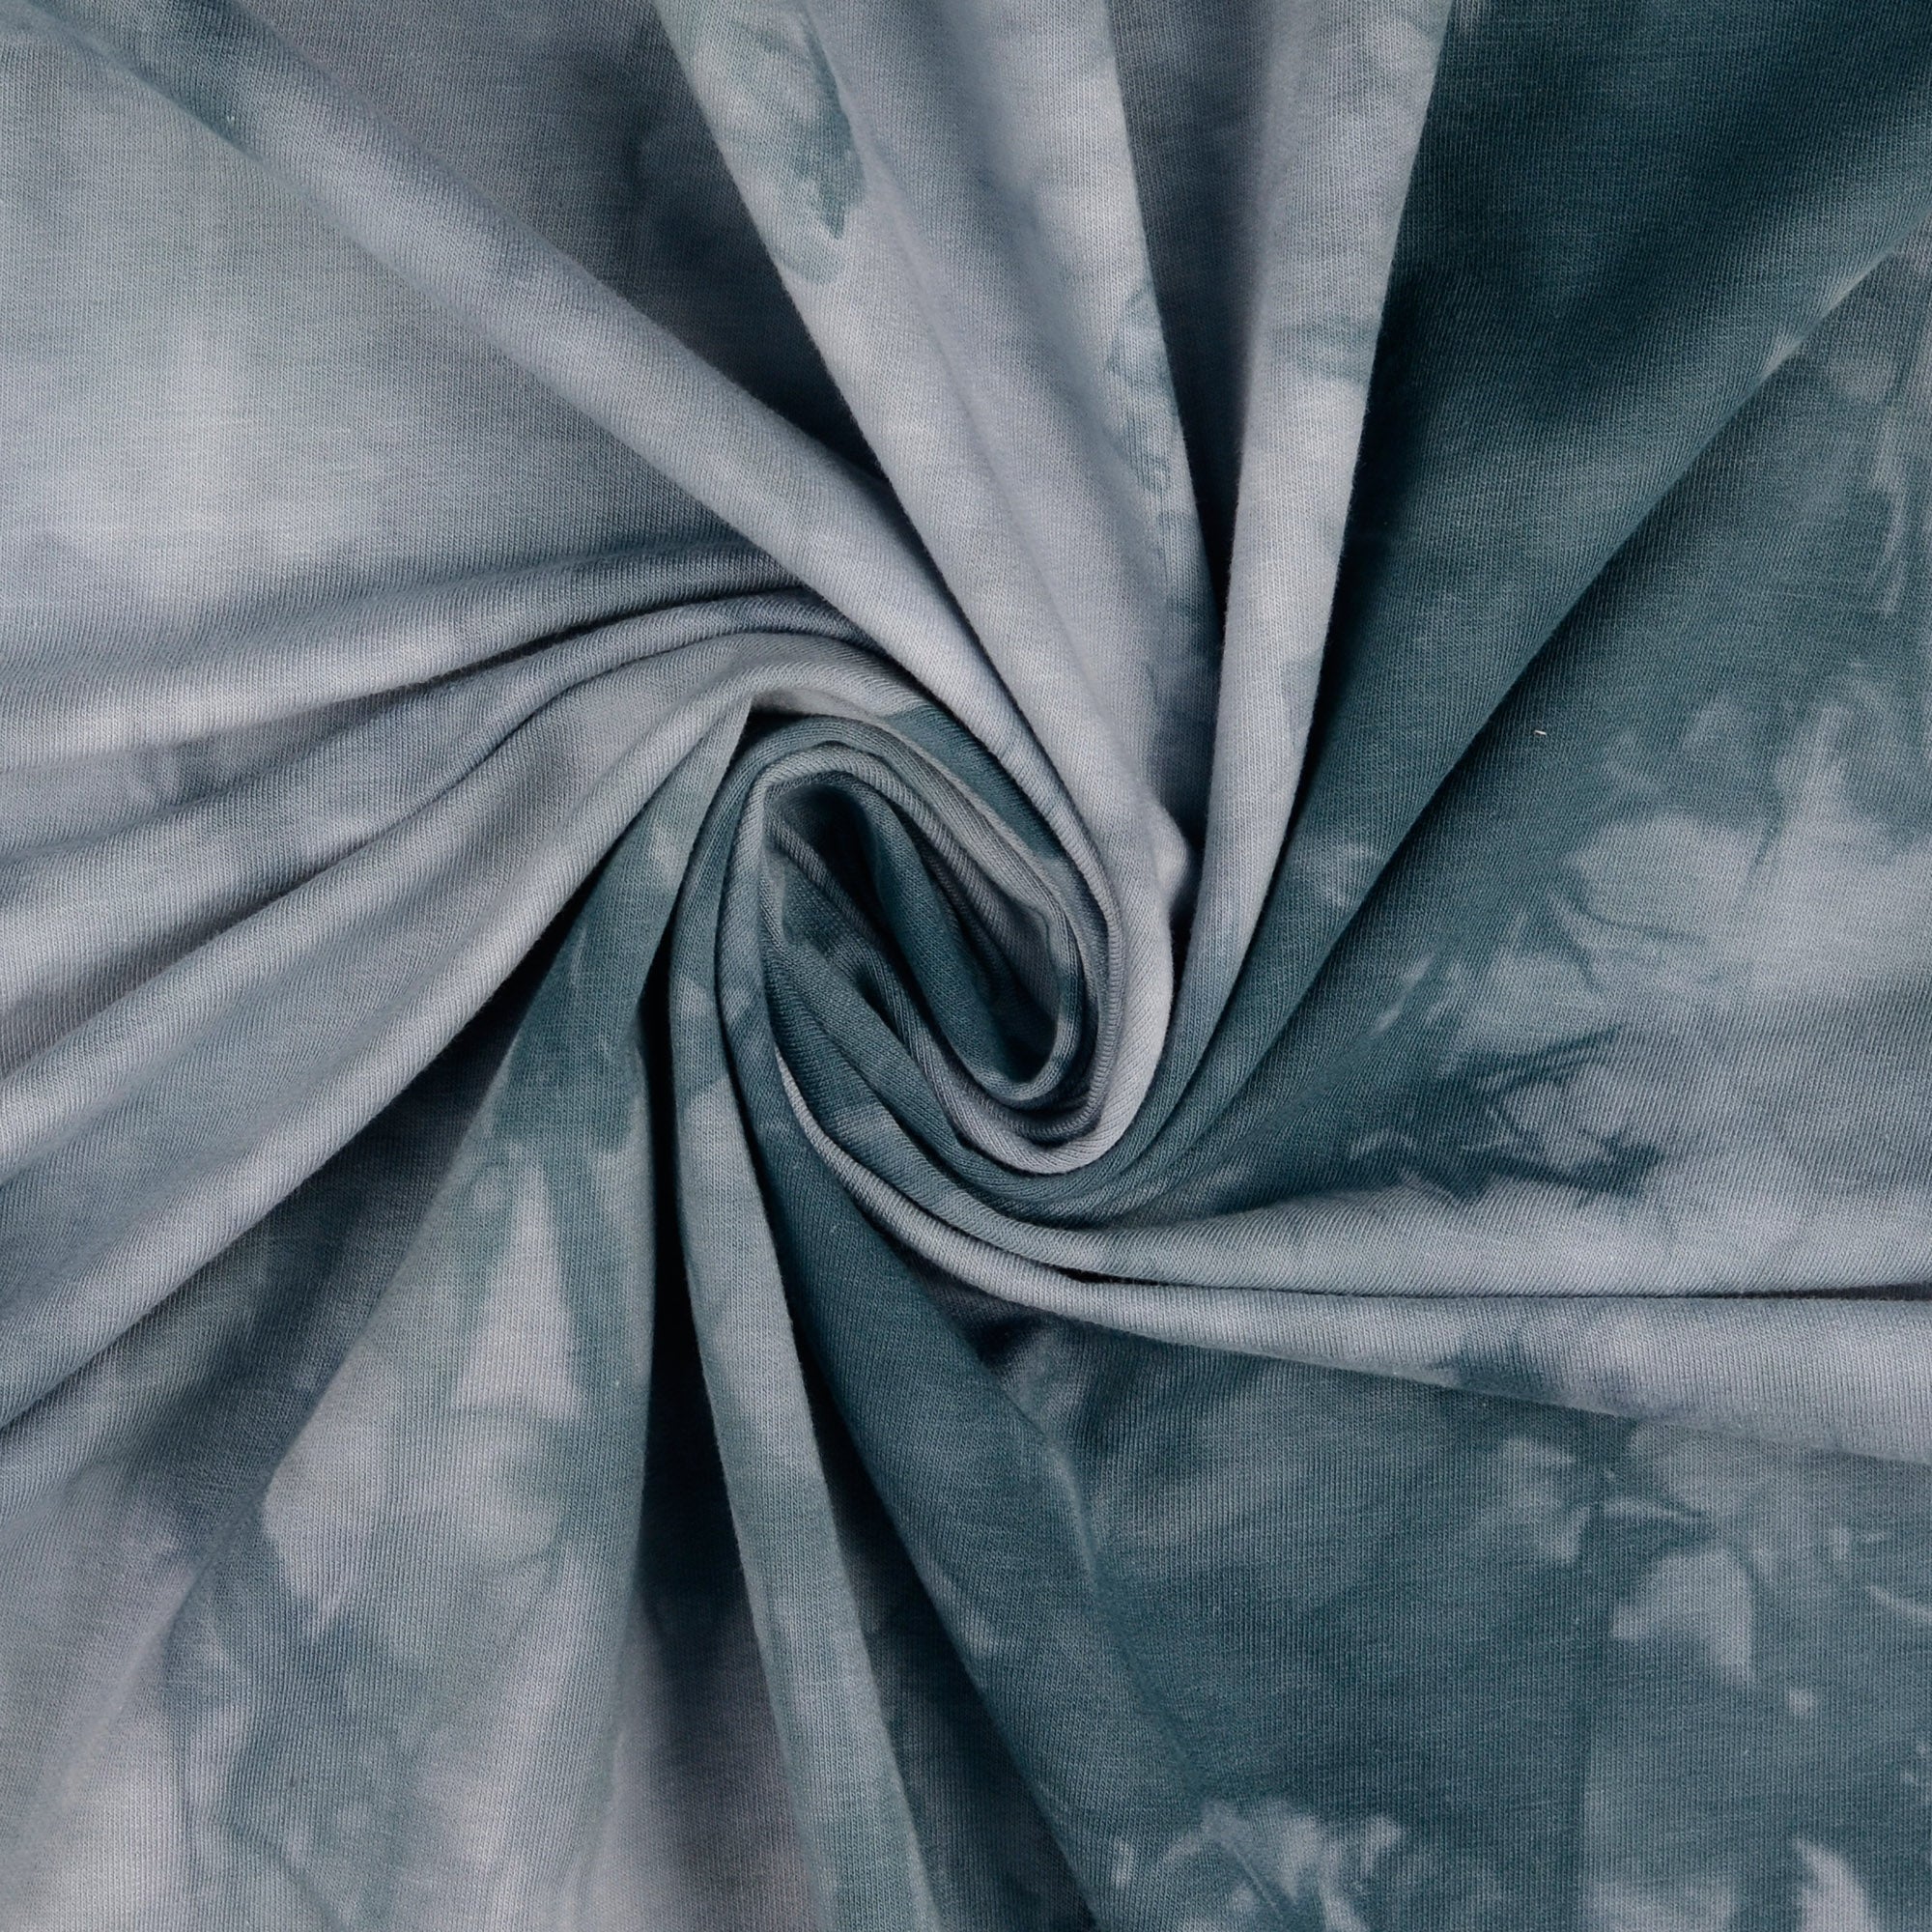 REMNANT 2.19 Metres - Tie Dye Teal Cotton French Terry Fabric